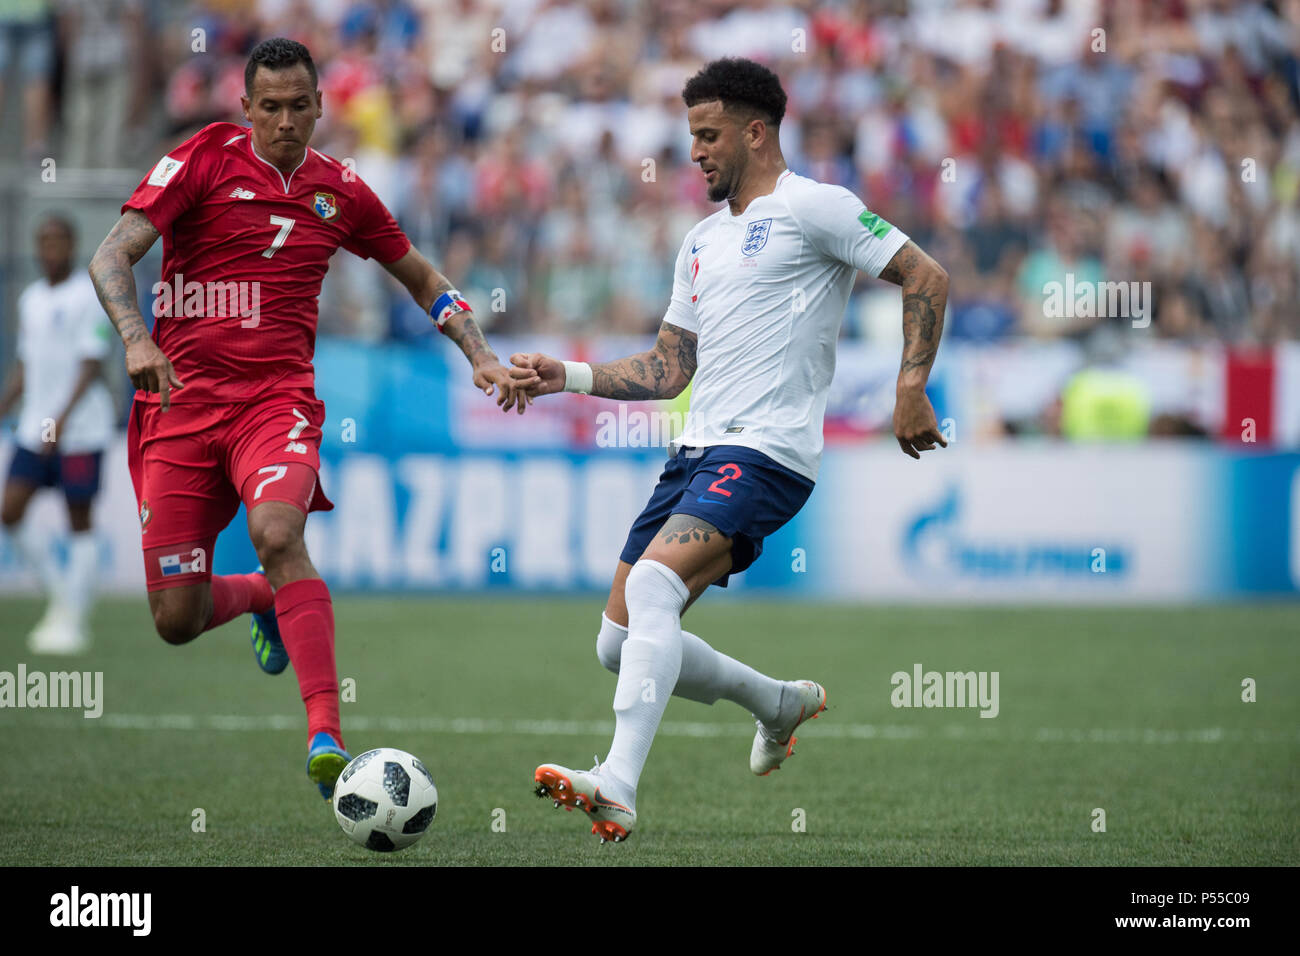 Blas PEREZ (left, PAN) versus Kyle WALKER (ENG), action, duels, England (ENG) - Panama (PAN) 6: 1, preliminary round, Group G, match 30, on 24.06.2018 in Nizhny Novgorod; Football World Cup 2018 in Russia from 14.06. - 15.07.2018. | usage worldwide Stock Photo